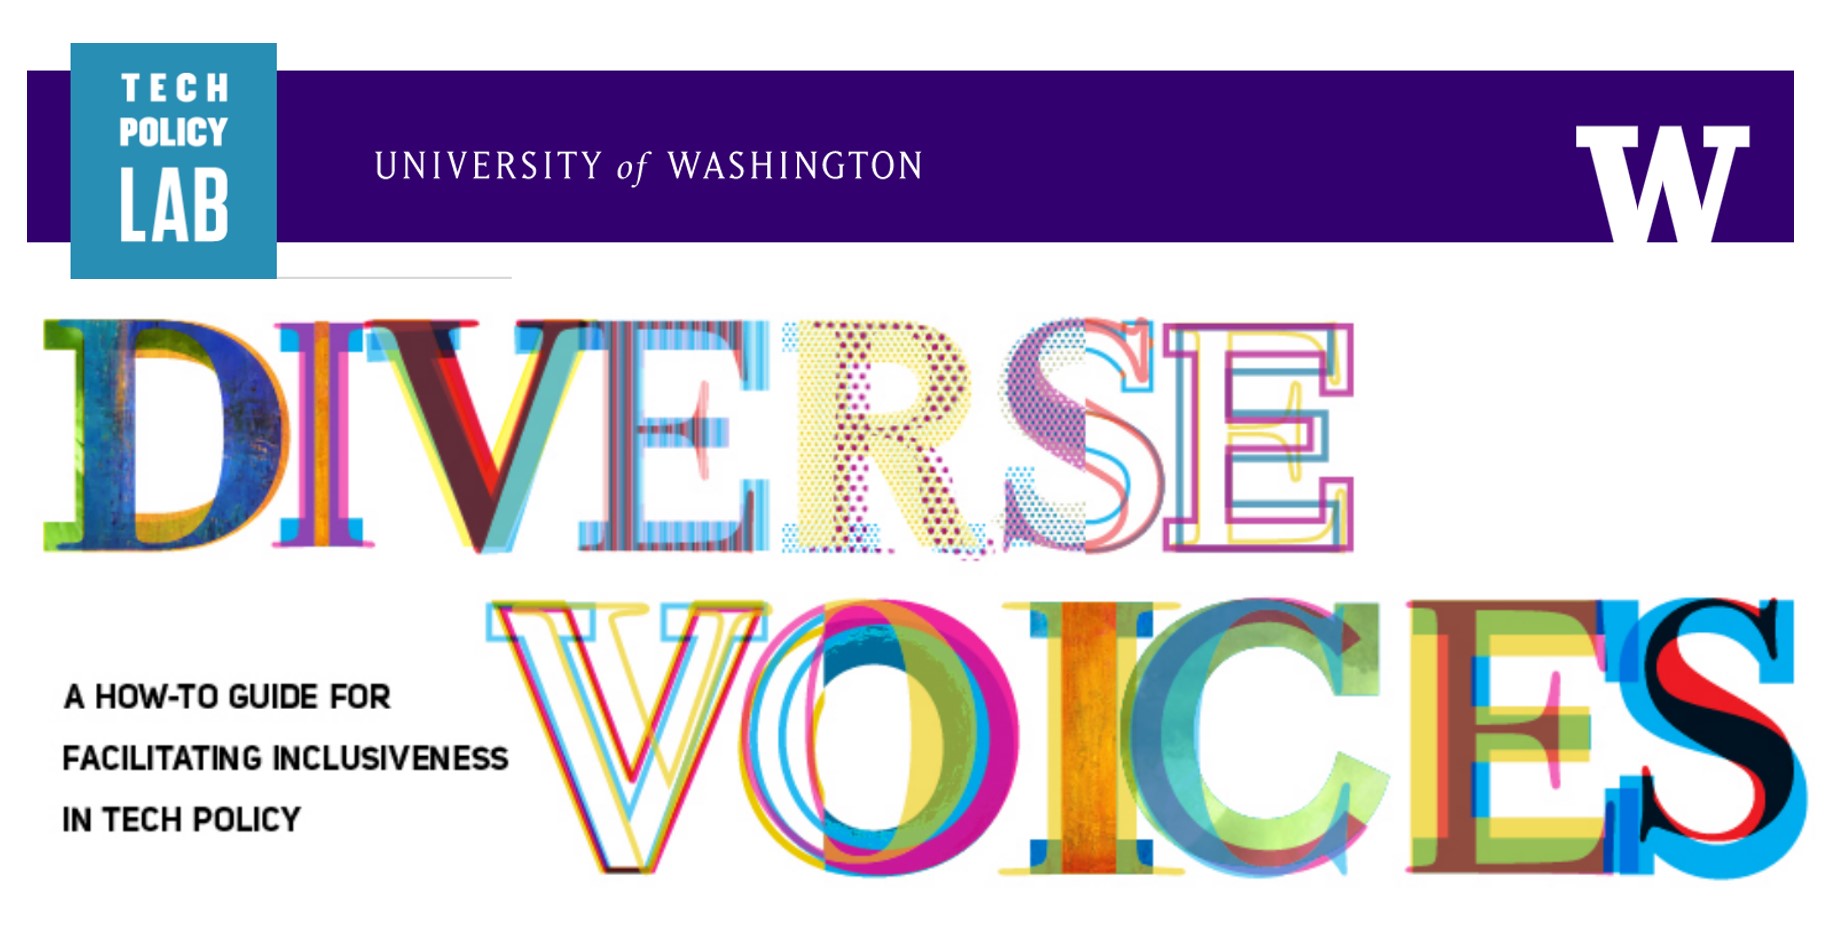 The Diverse Voices project from University of Washington Tech Policy Lab involves academic papers and practical how-to guides.